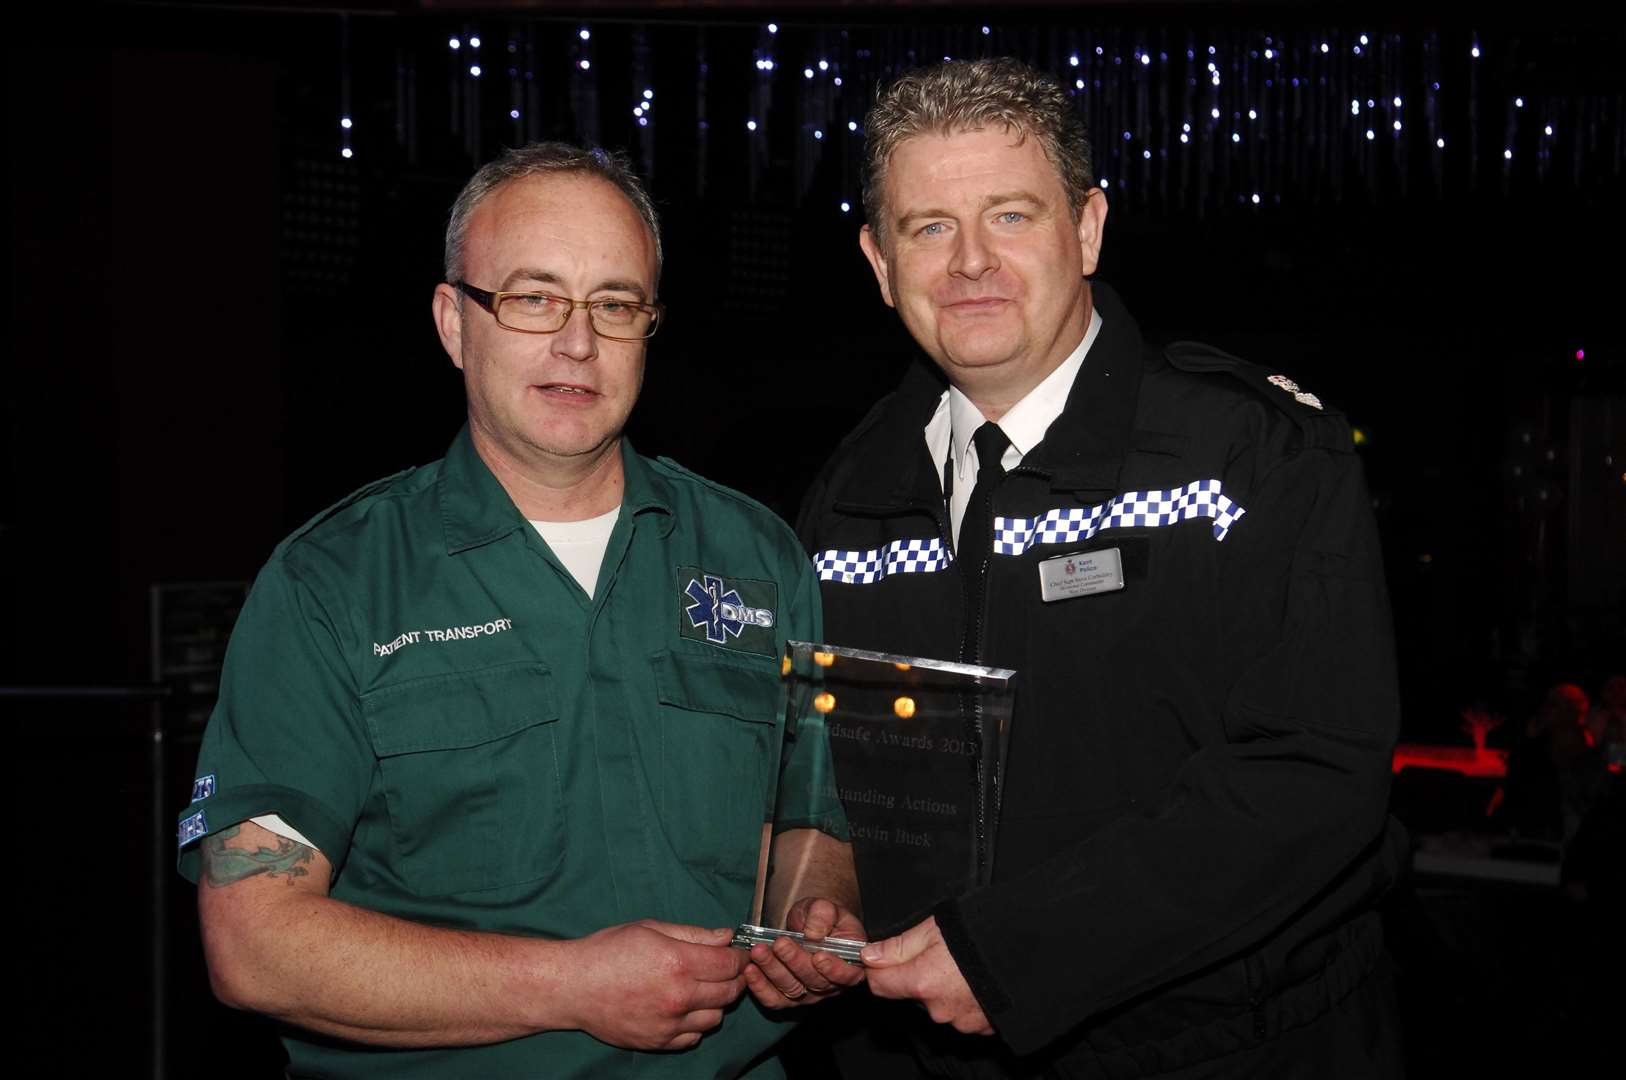 Kevin Buck getting his award from former Chief Supt Corbishley at the Maidsafe Awards Evening in 2014